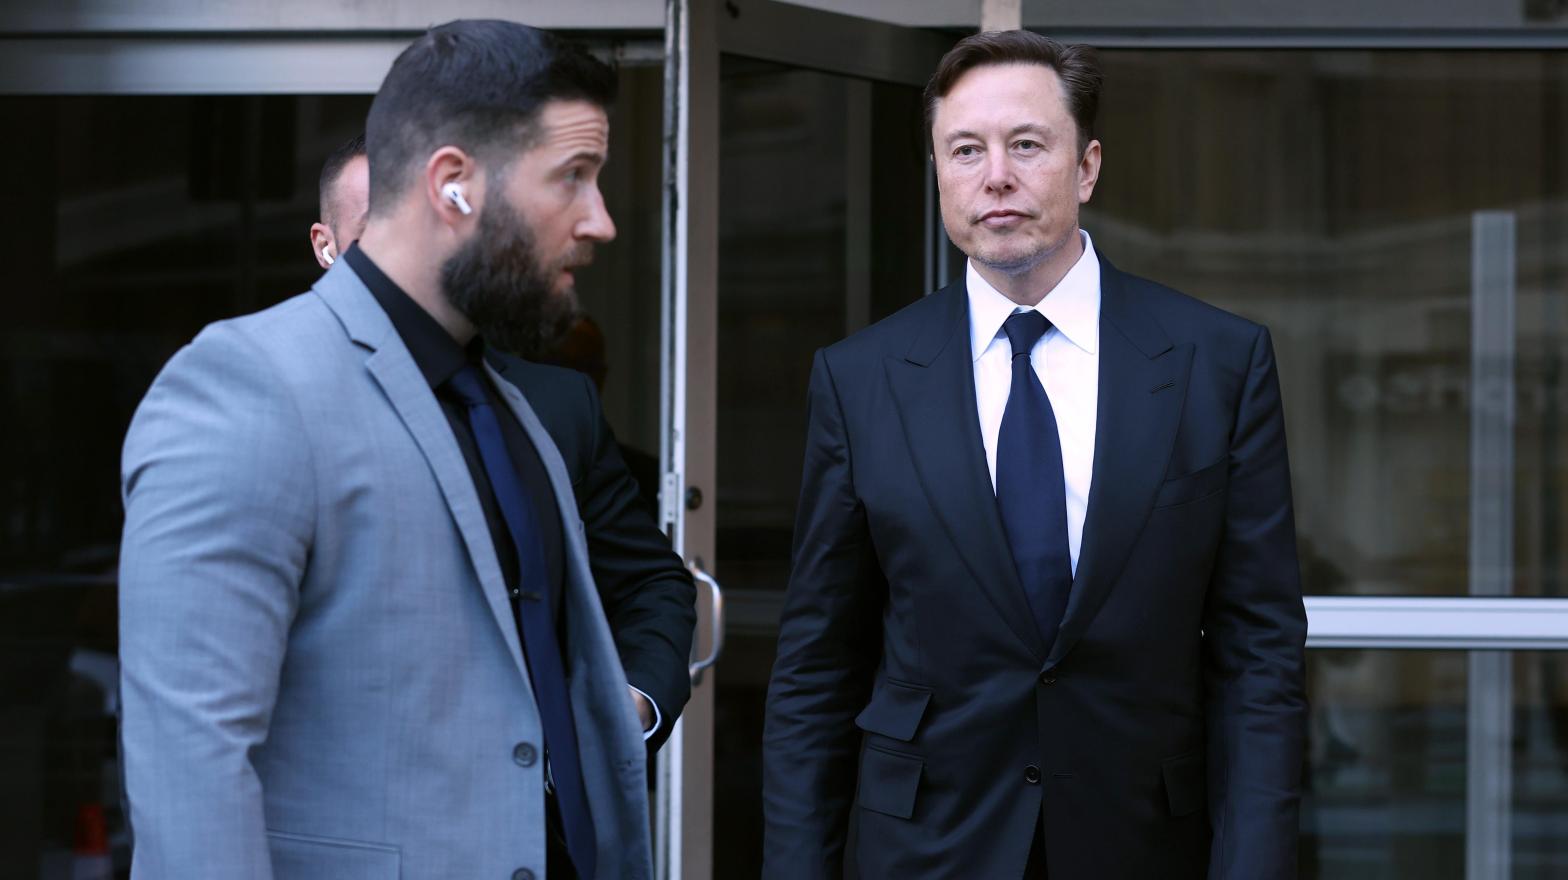 Tesla CEO Elon Musk leaves the Phillip Burton Federal Building on January 24, 2023 in San Francisco, California. Musk testified at a trial regarding a lawsuit that has investors suing Tesla and Musk over his August 2018 tweets saying he was taking Tesla private with funding that he had secure (Photo: Justin Sullivan, Getty Images)